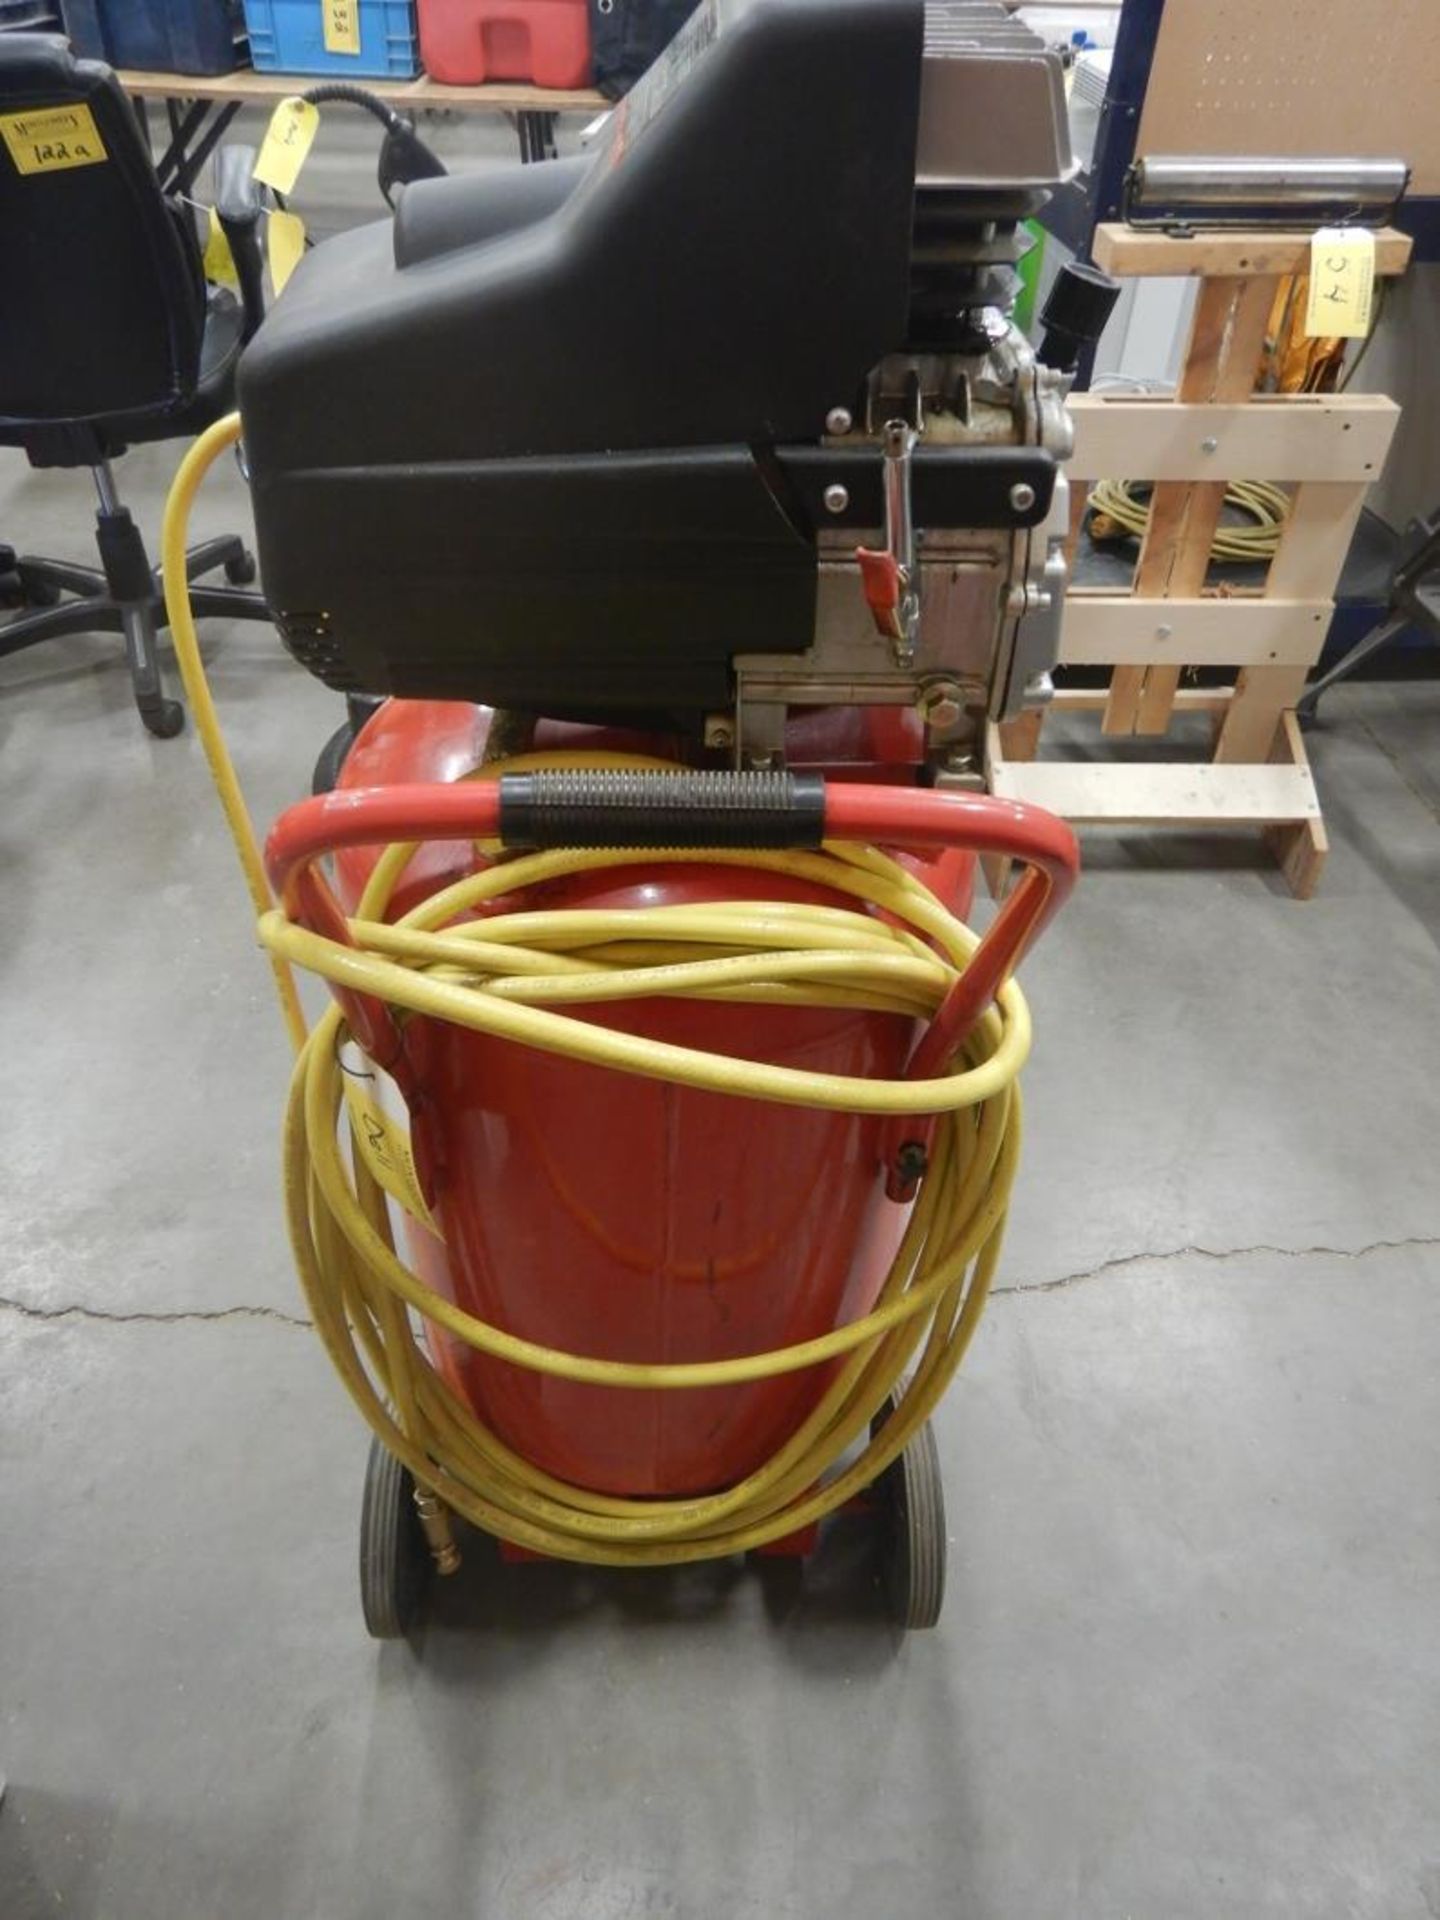 KING CANADA PERFORMANCE PLUS UPRIGHT 5HP AIR COMPRESSOR W/ HOSE - Image 5 of 8